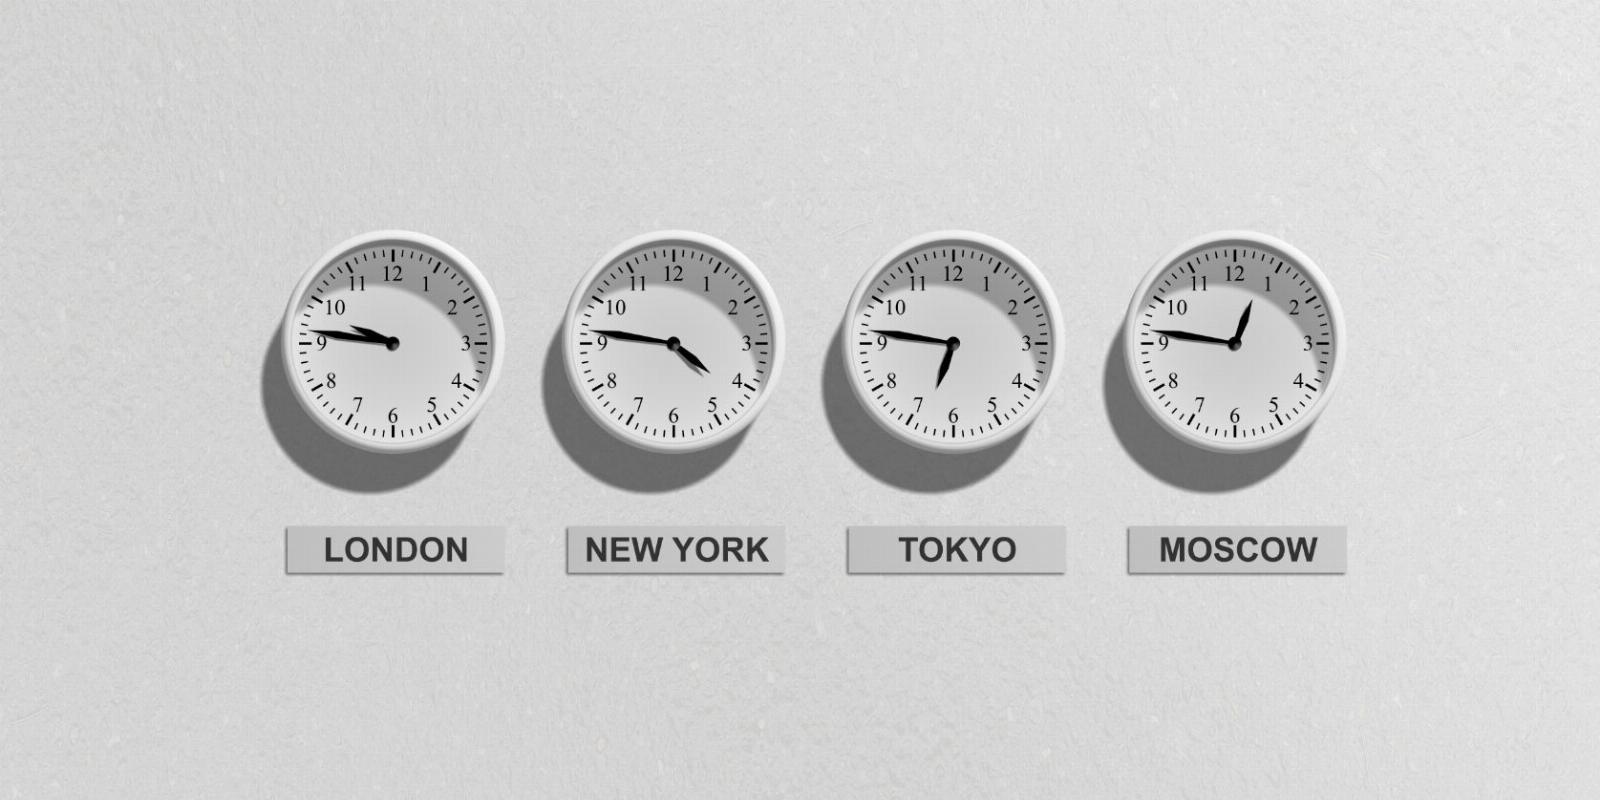 How to Change the Time Zone on Your Samsung Phone